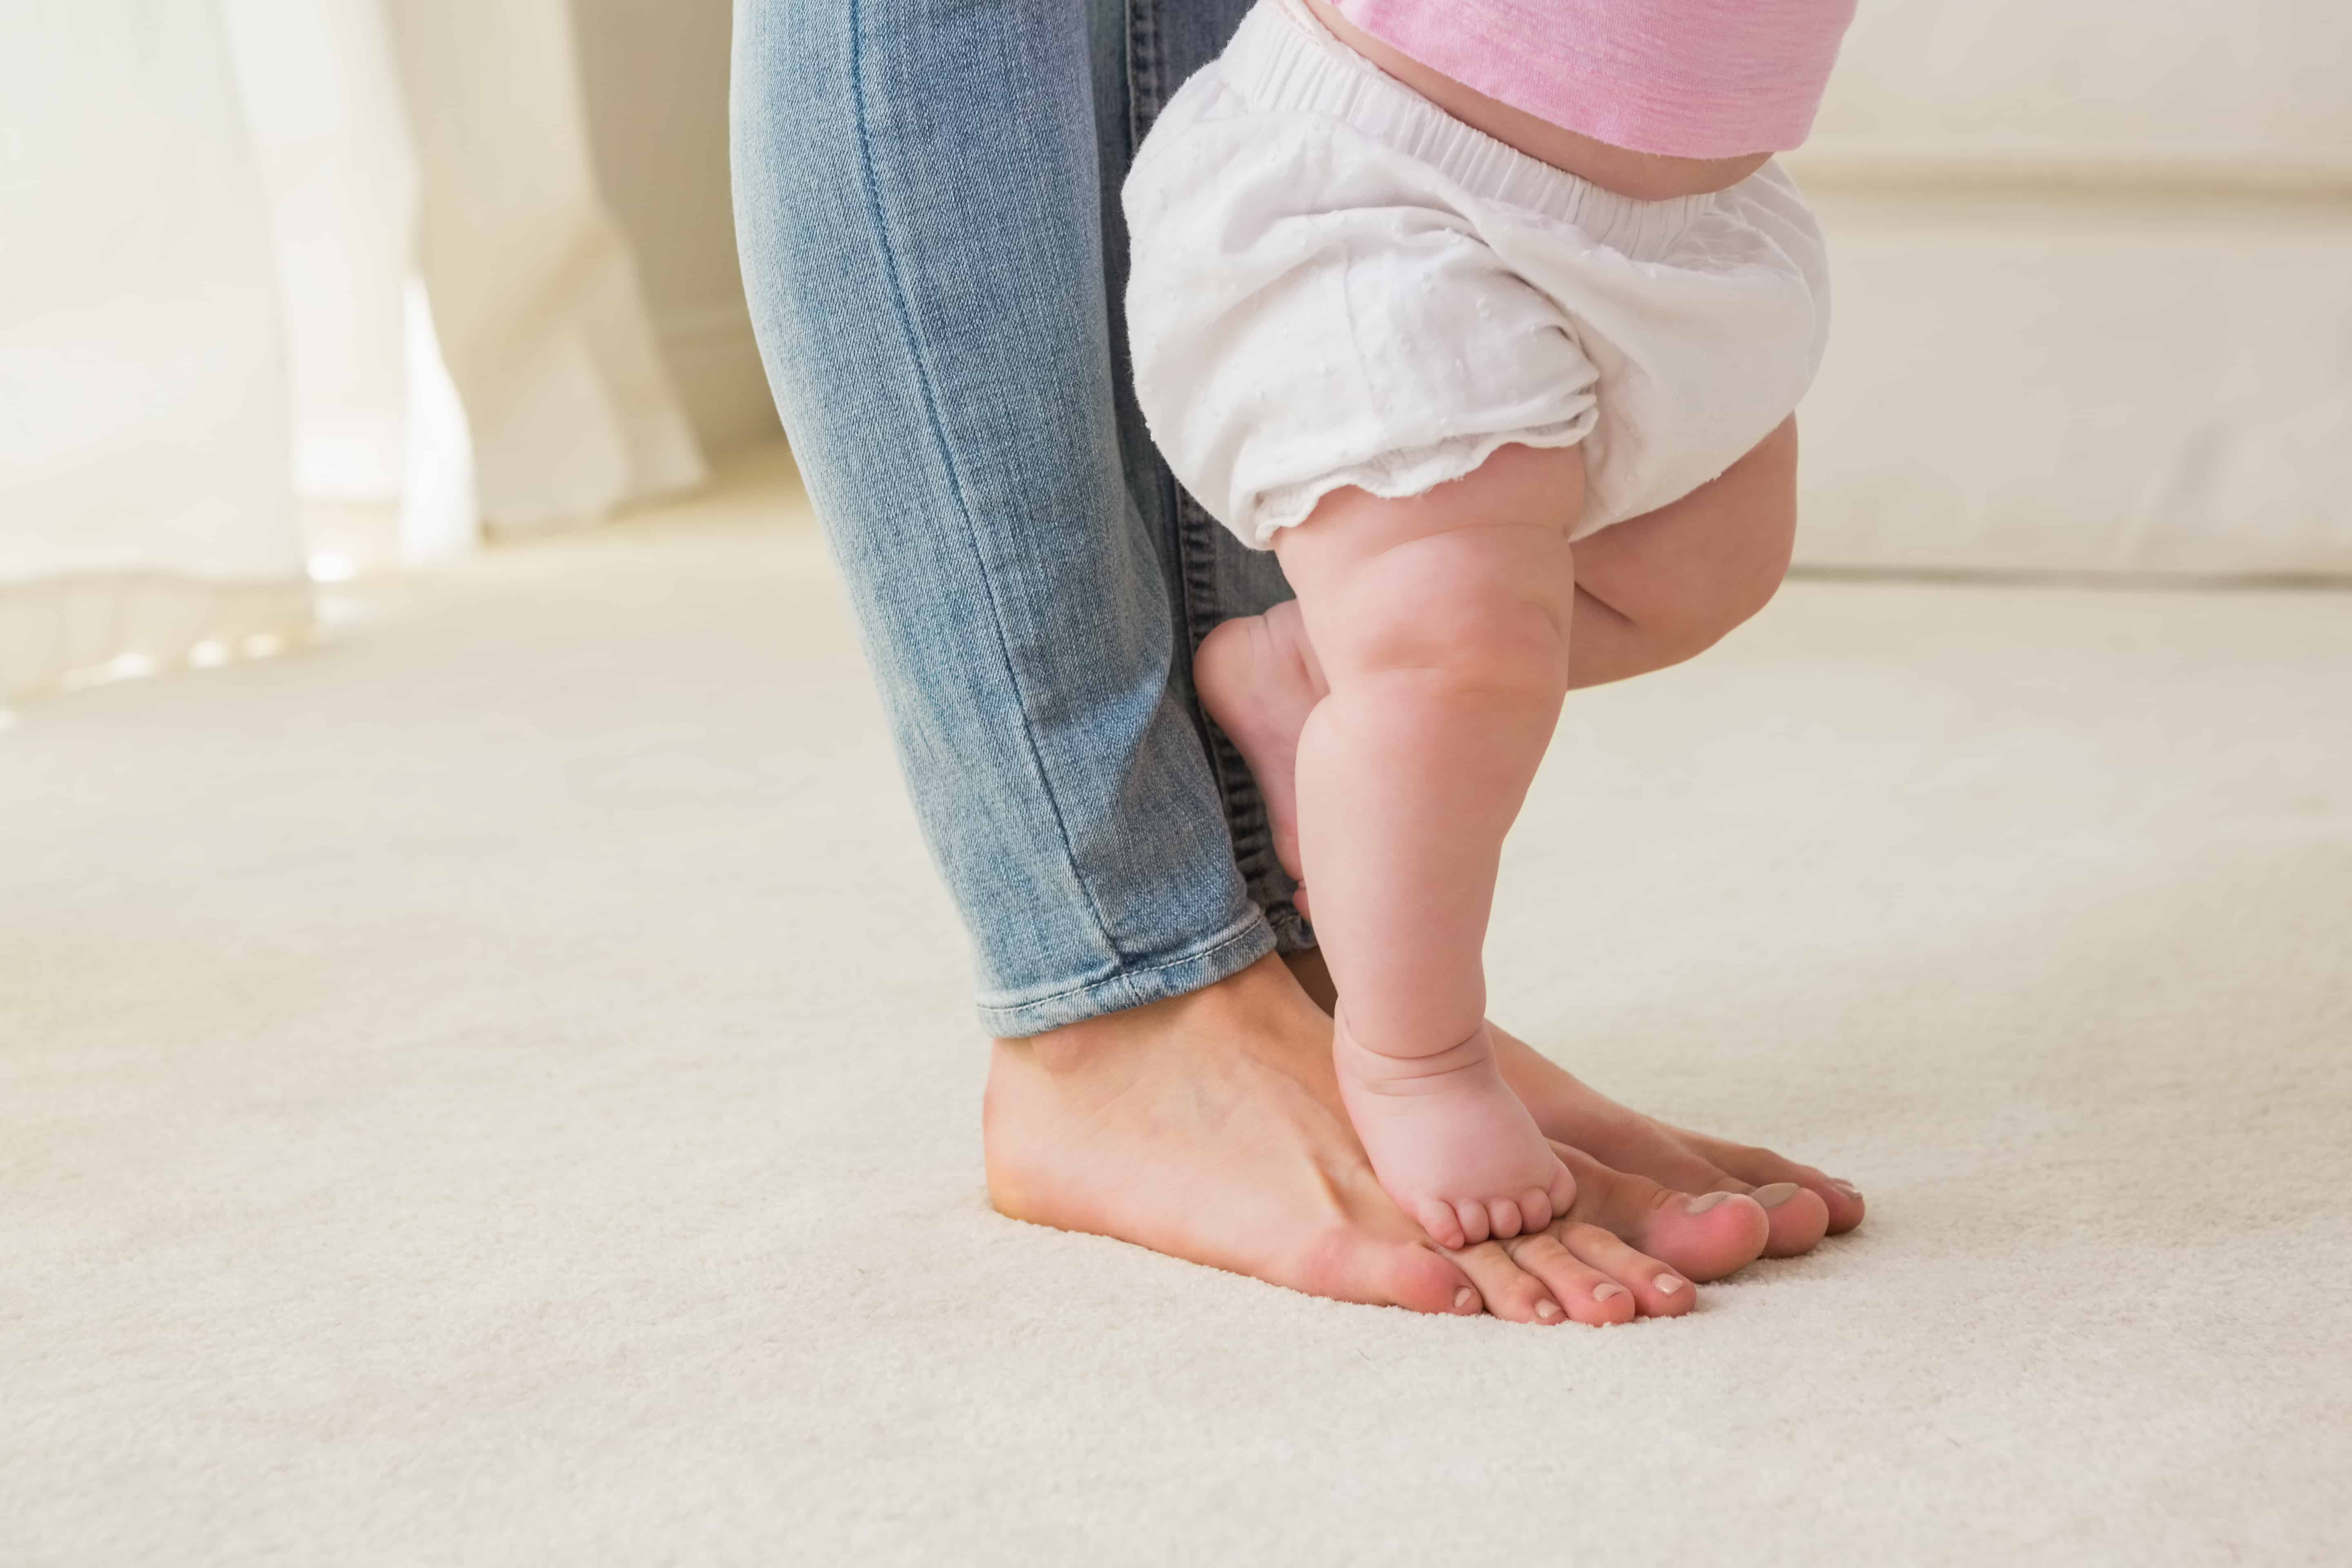 How can I help my baby learn to walk?